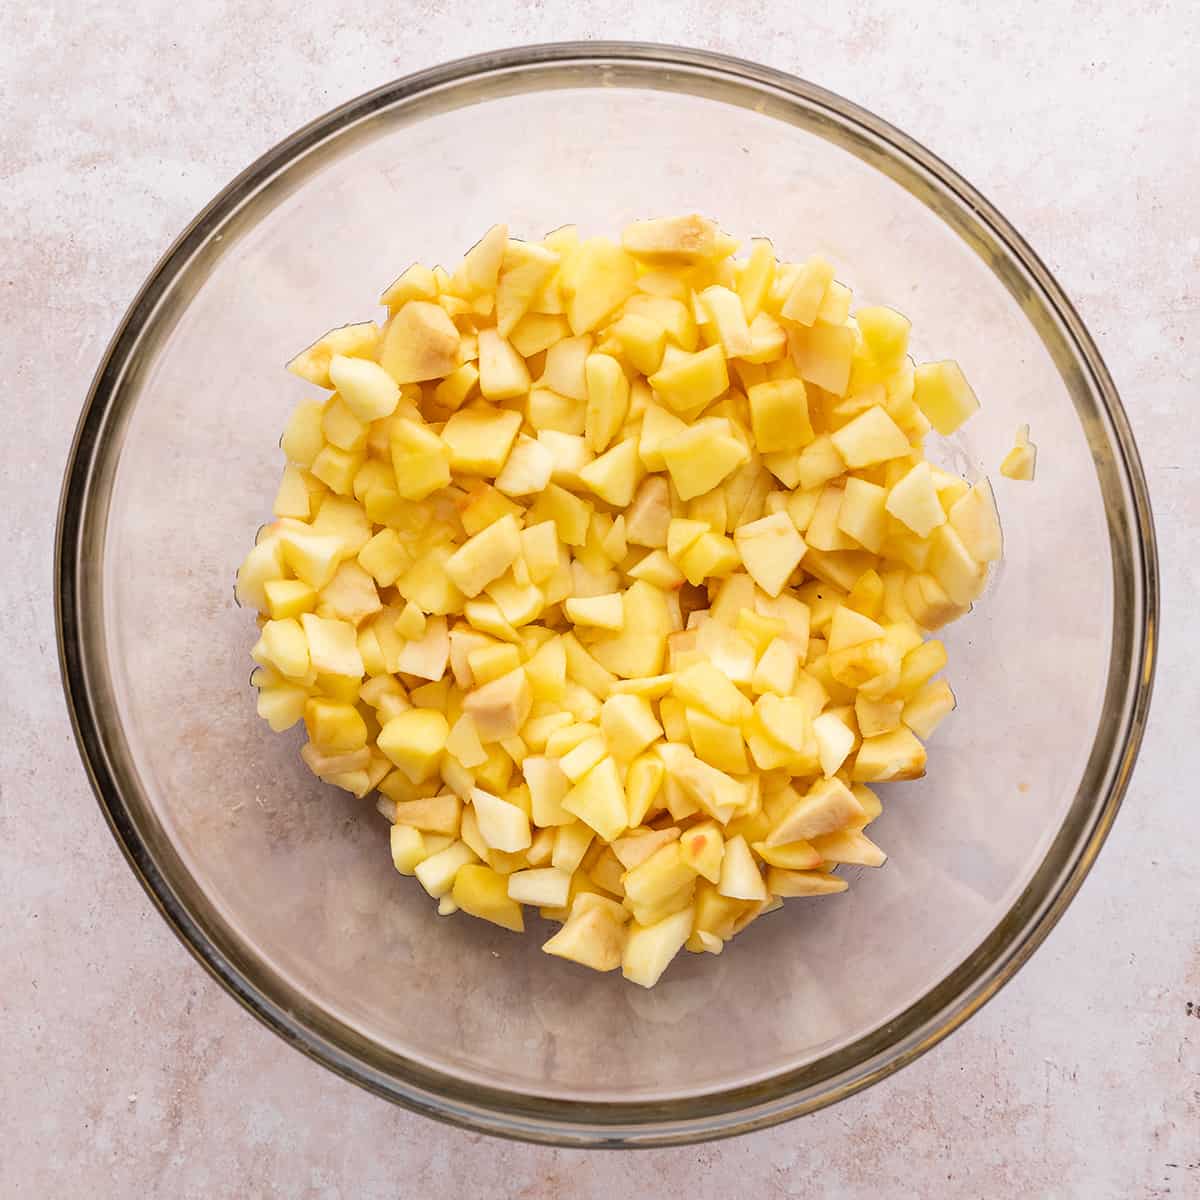 peeled, diced and partially cooked apples in a glass bowl